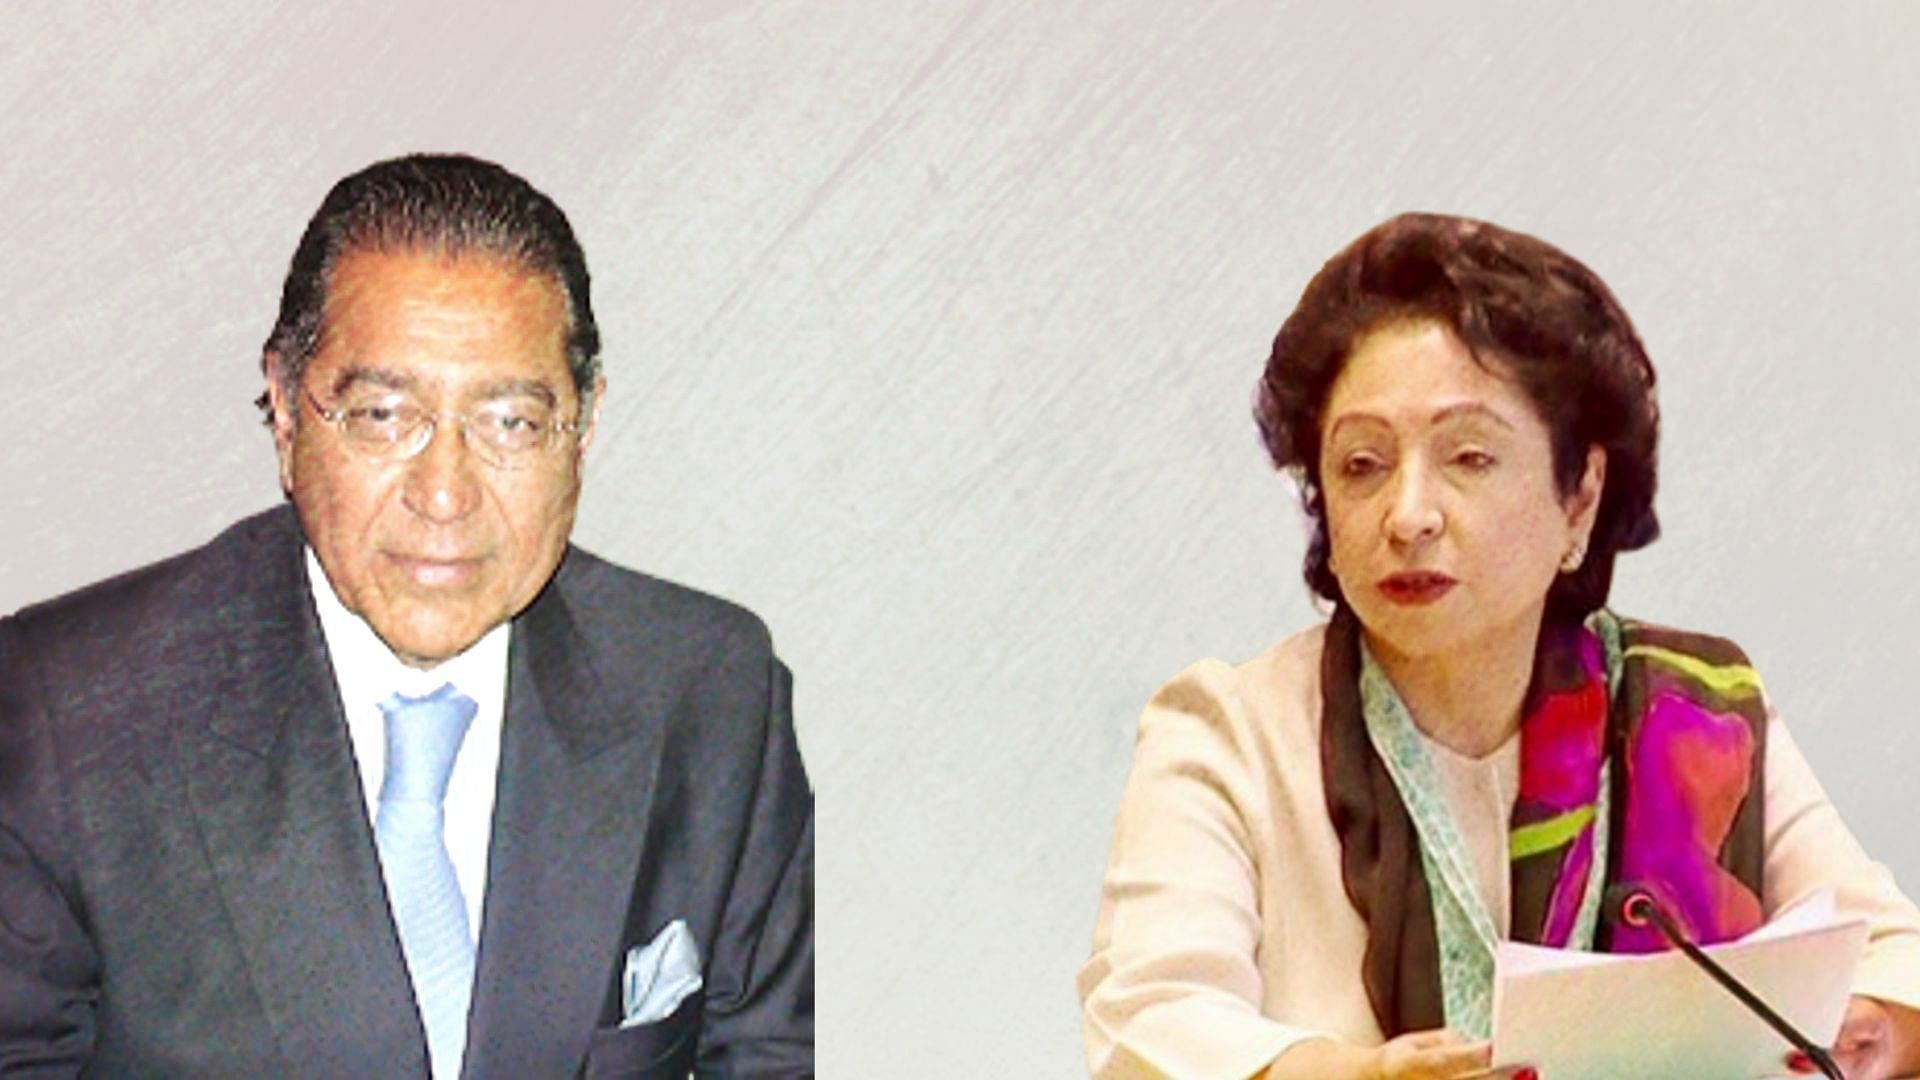 In a major reshuffle of diplomats, Pakistan on Monday, 30 September removed Maleeha Lodhi and appointed Munir Akram as the country’s permanent representative to the UN.